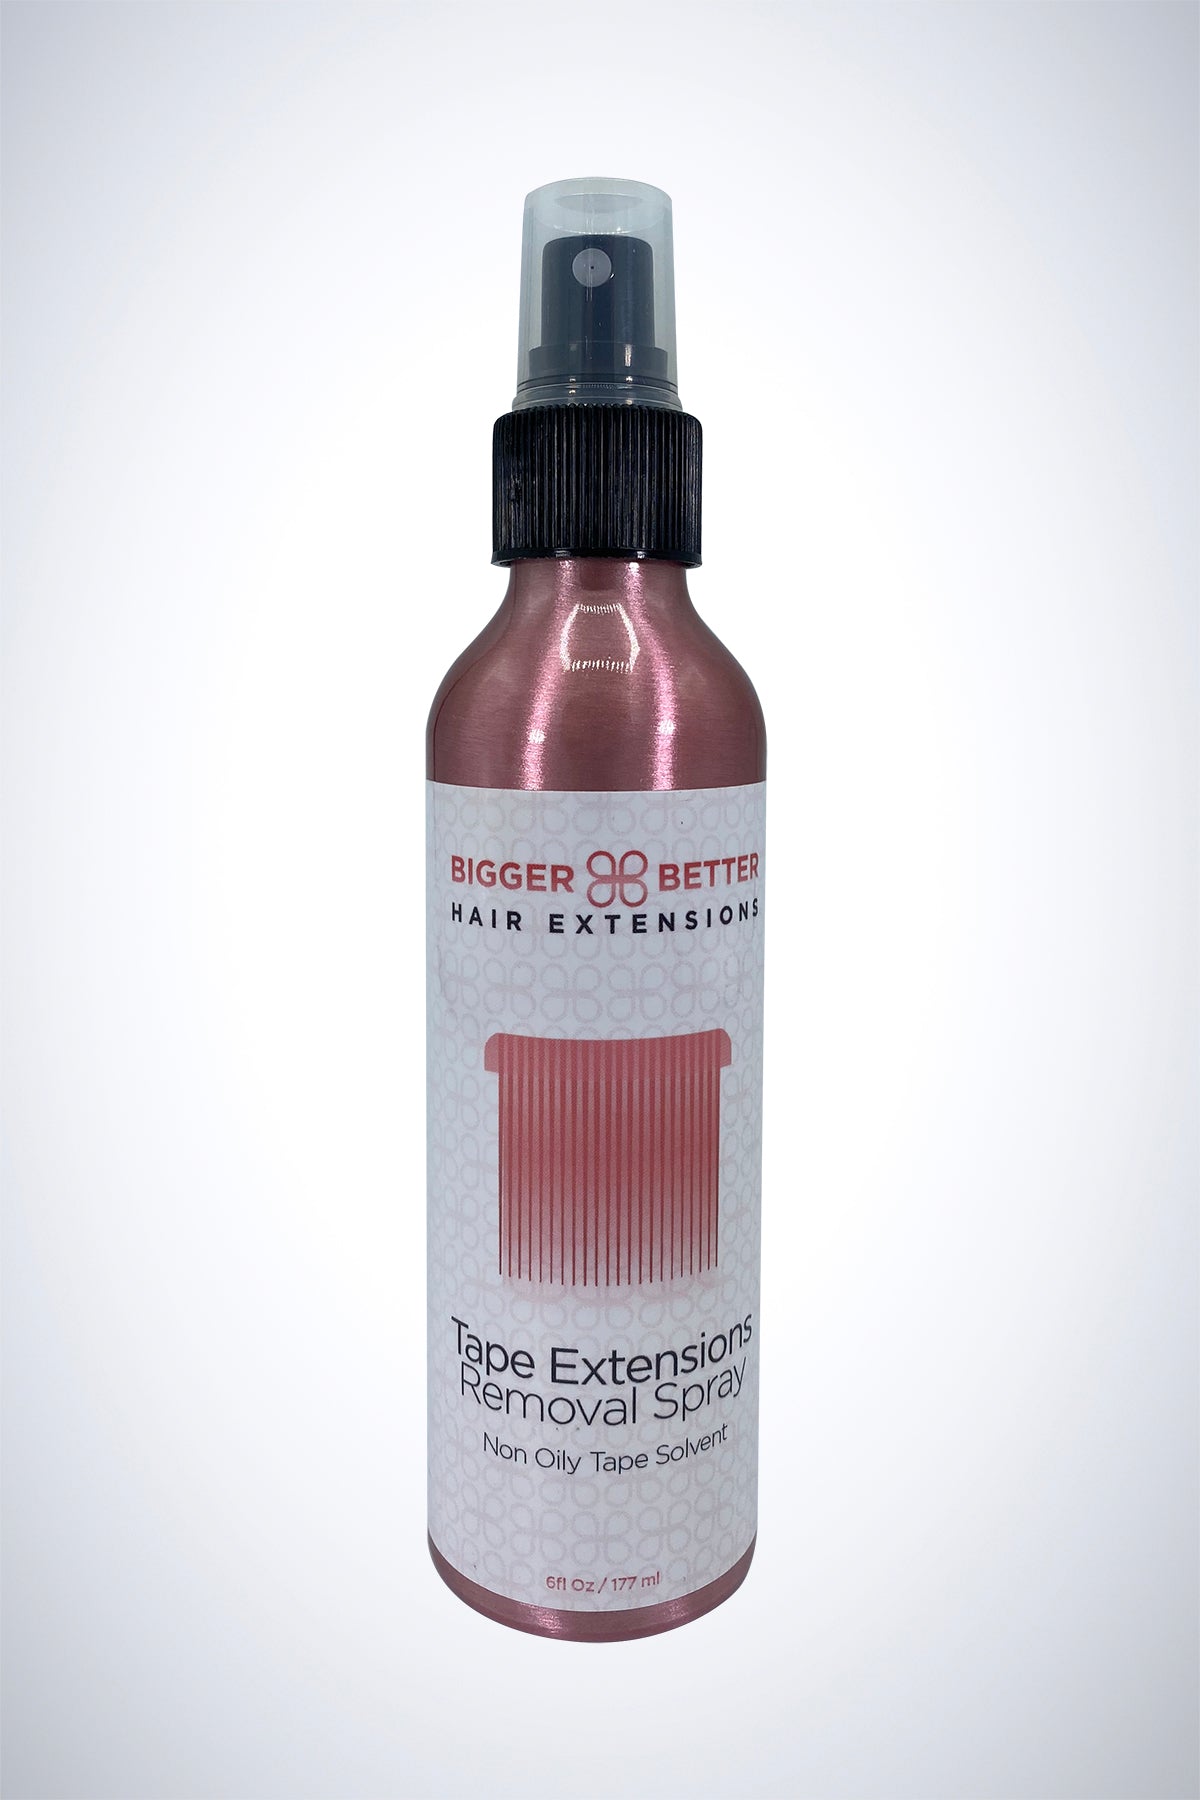 Tape Extensions Removal Spray